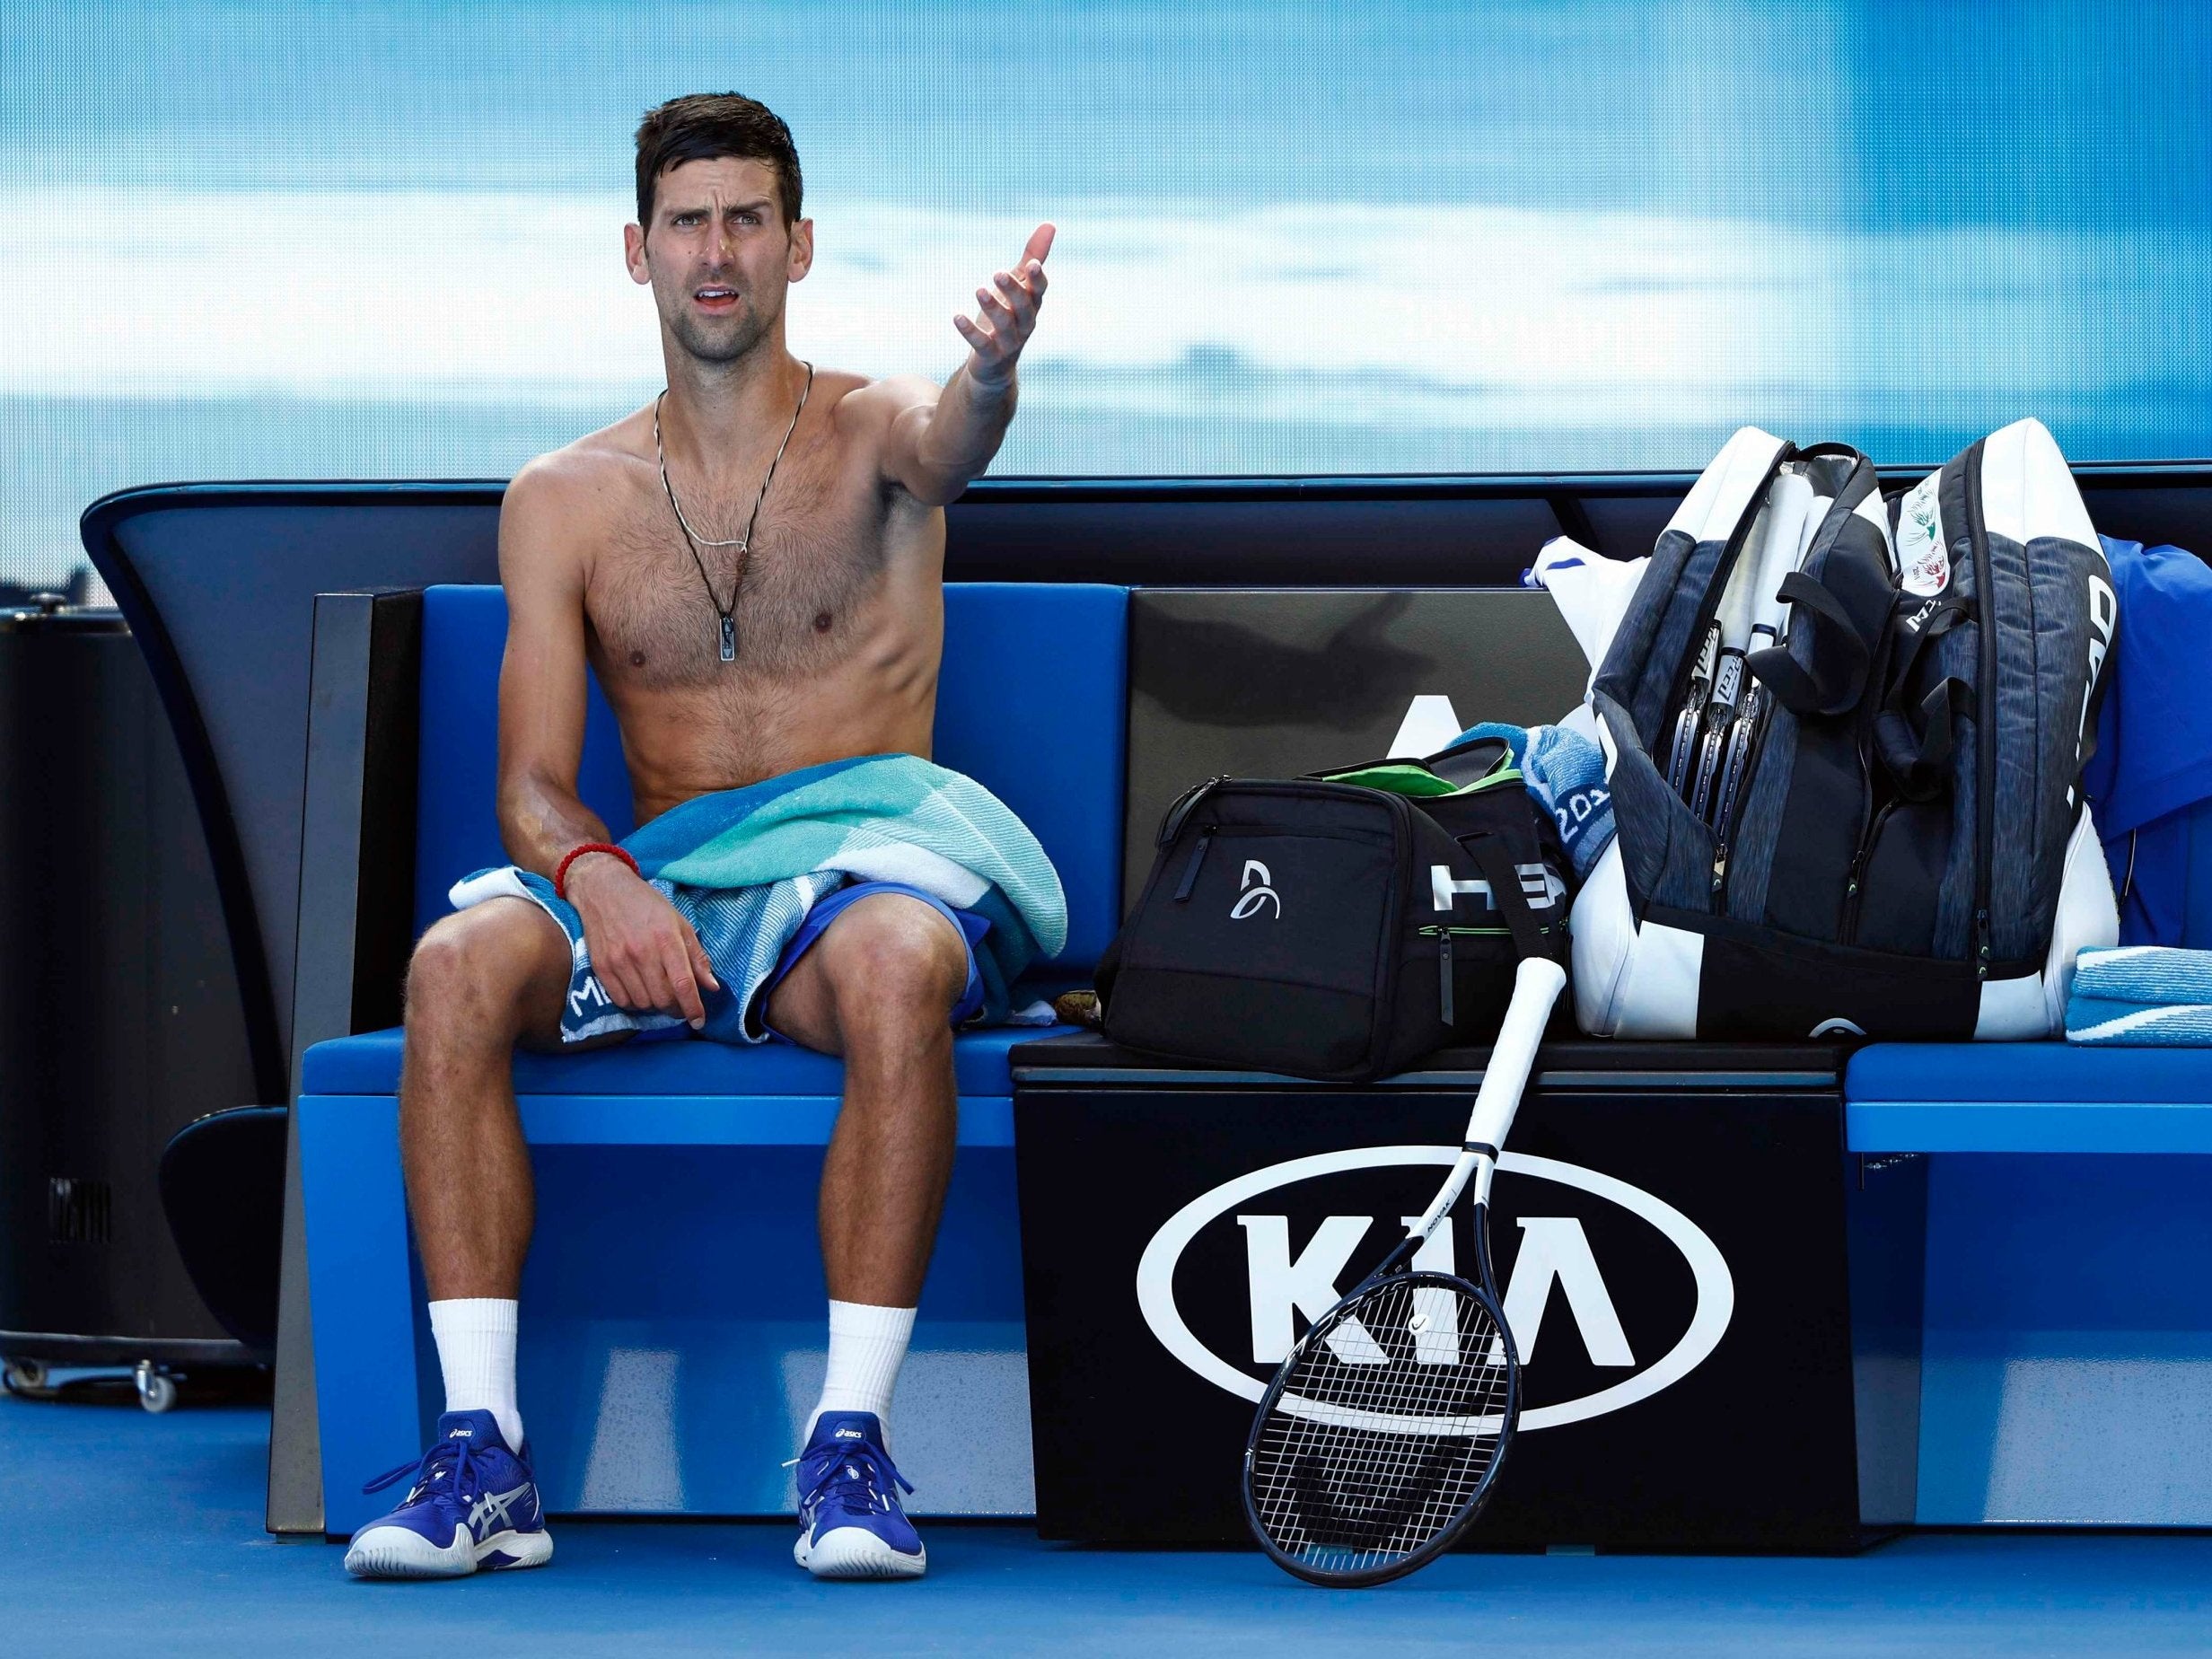 Novak Djokovic was unhappy with the arena lights being turned on earlier than usual